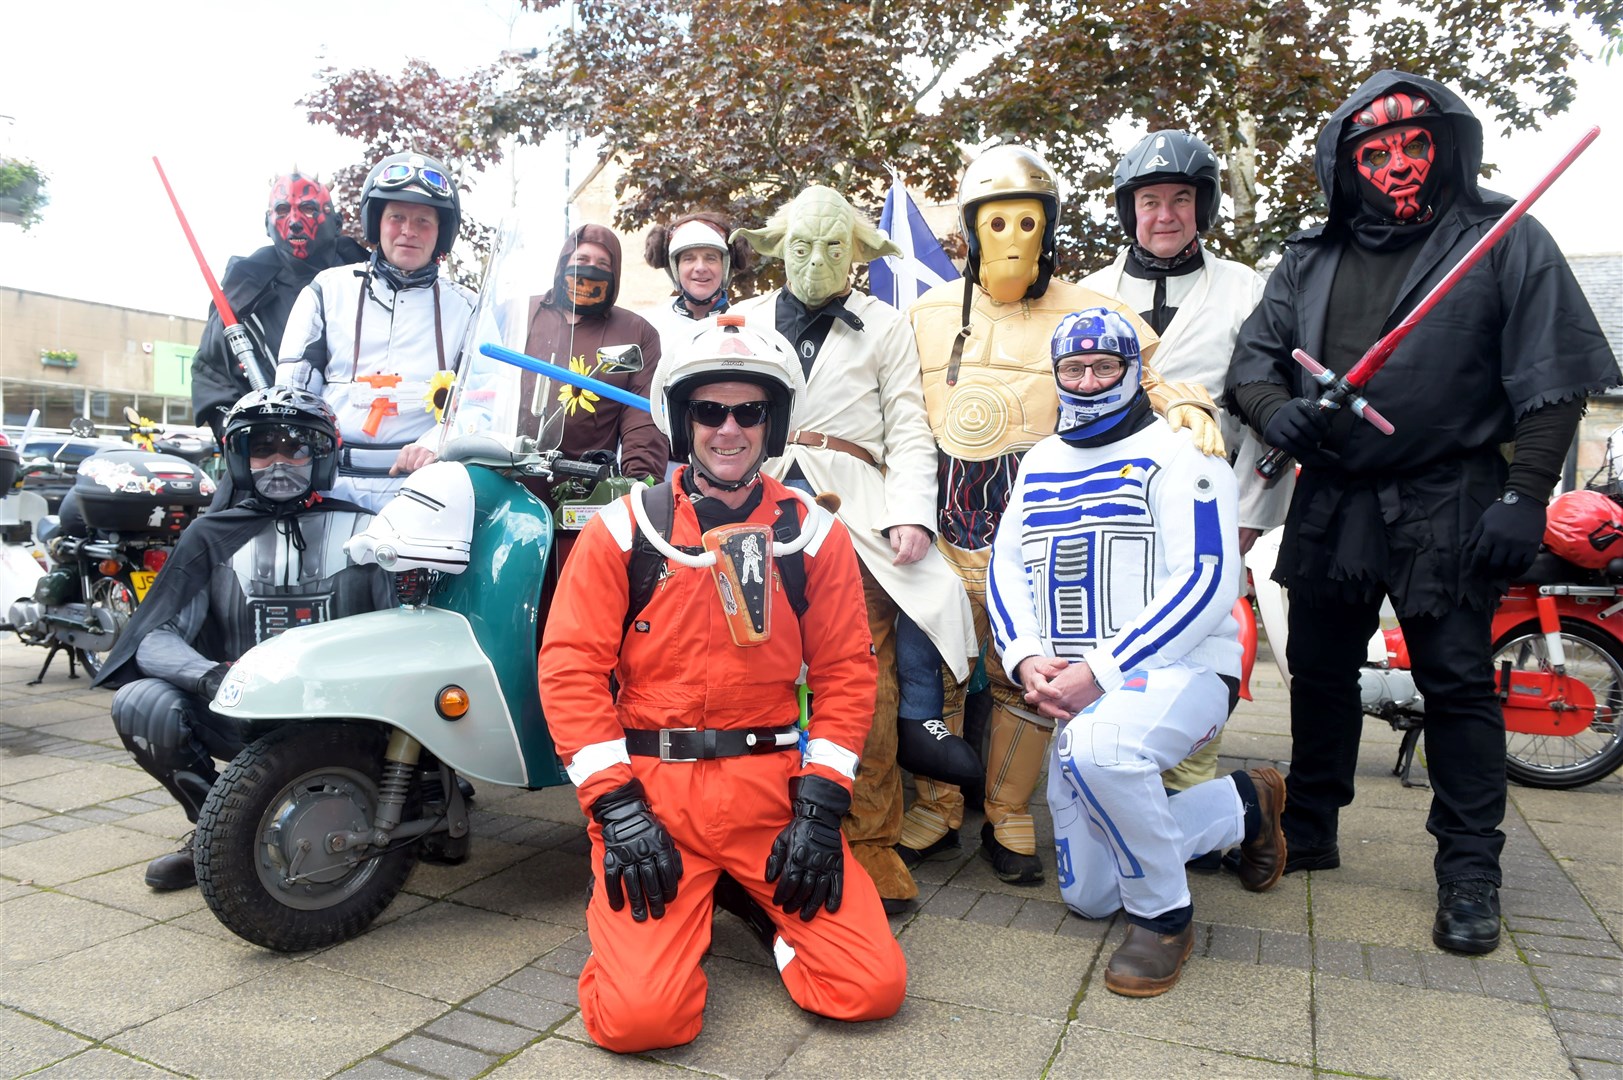 Moped riders from Alness area gather on the High Street dressed as Star Wars characters for a charity fundraising jaunt around the NC500 for Highland Hospice. The total raised this year exceeds £7000. Picture: Callum Mackay. Image No. 044229